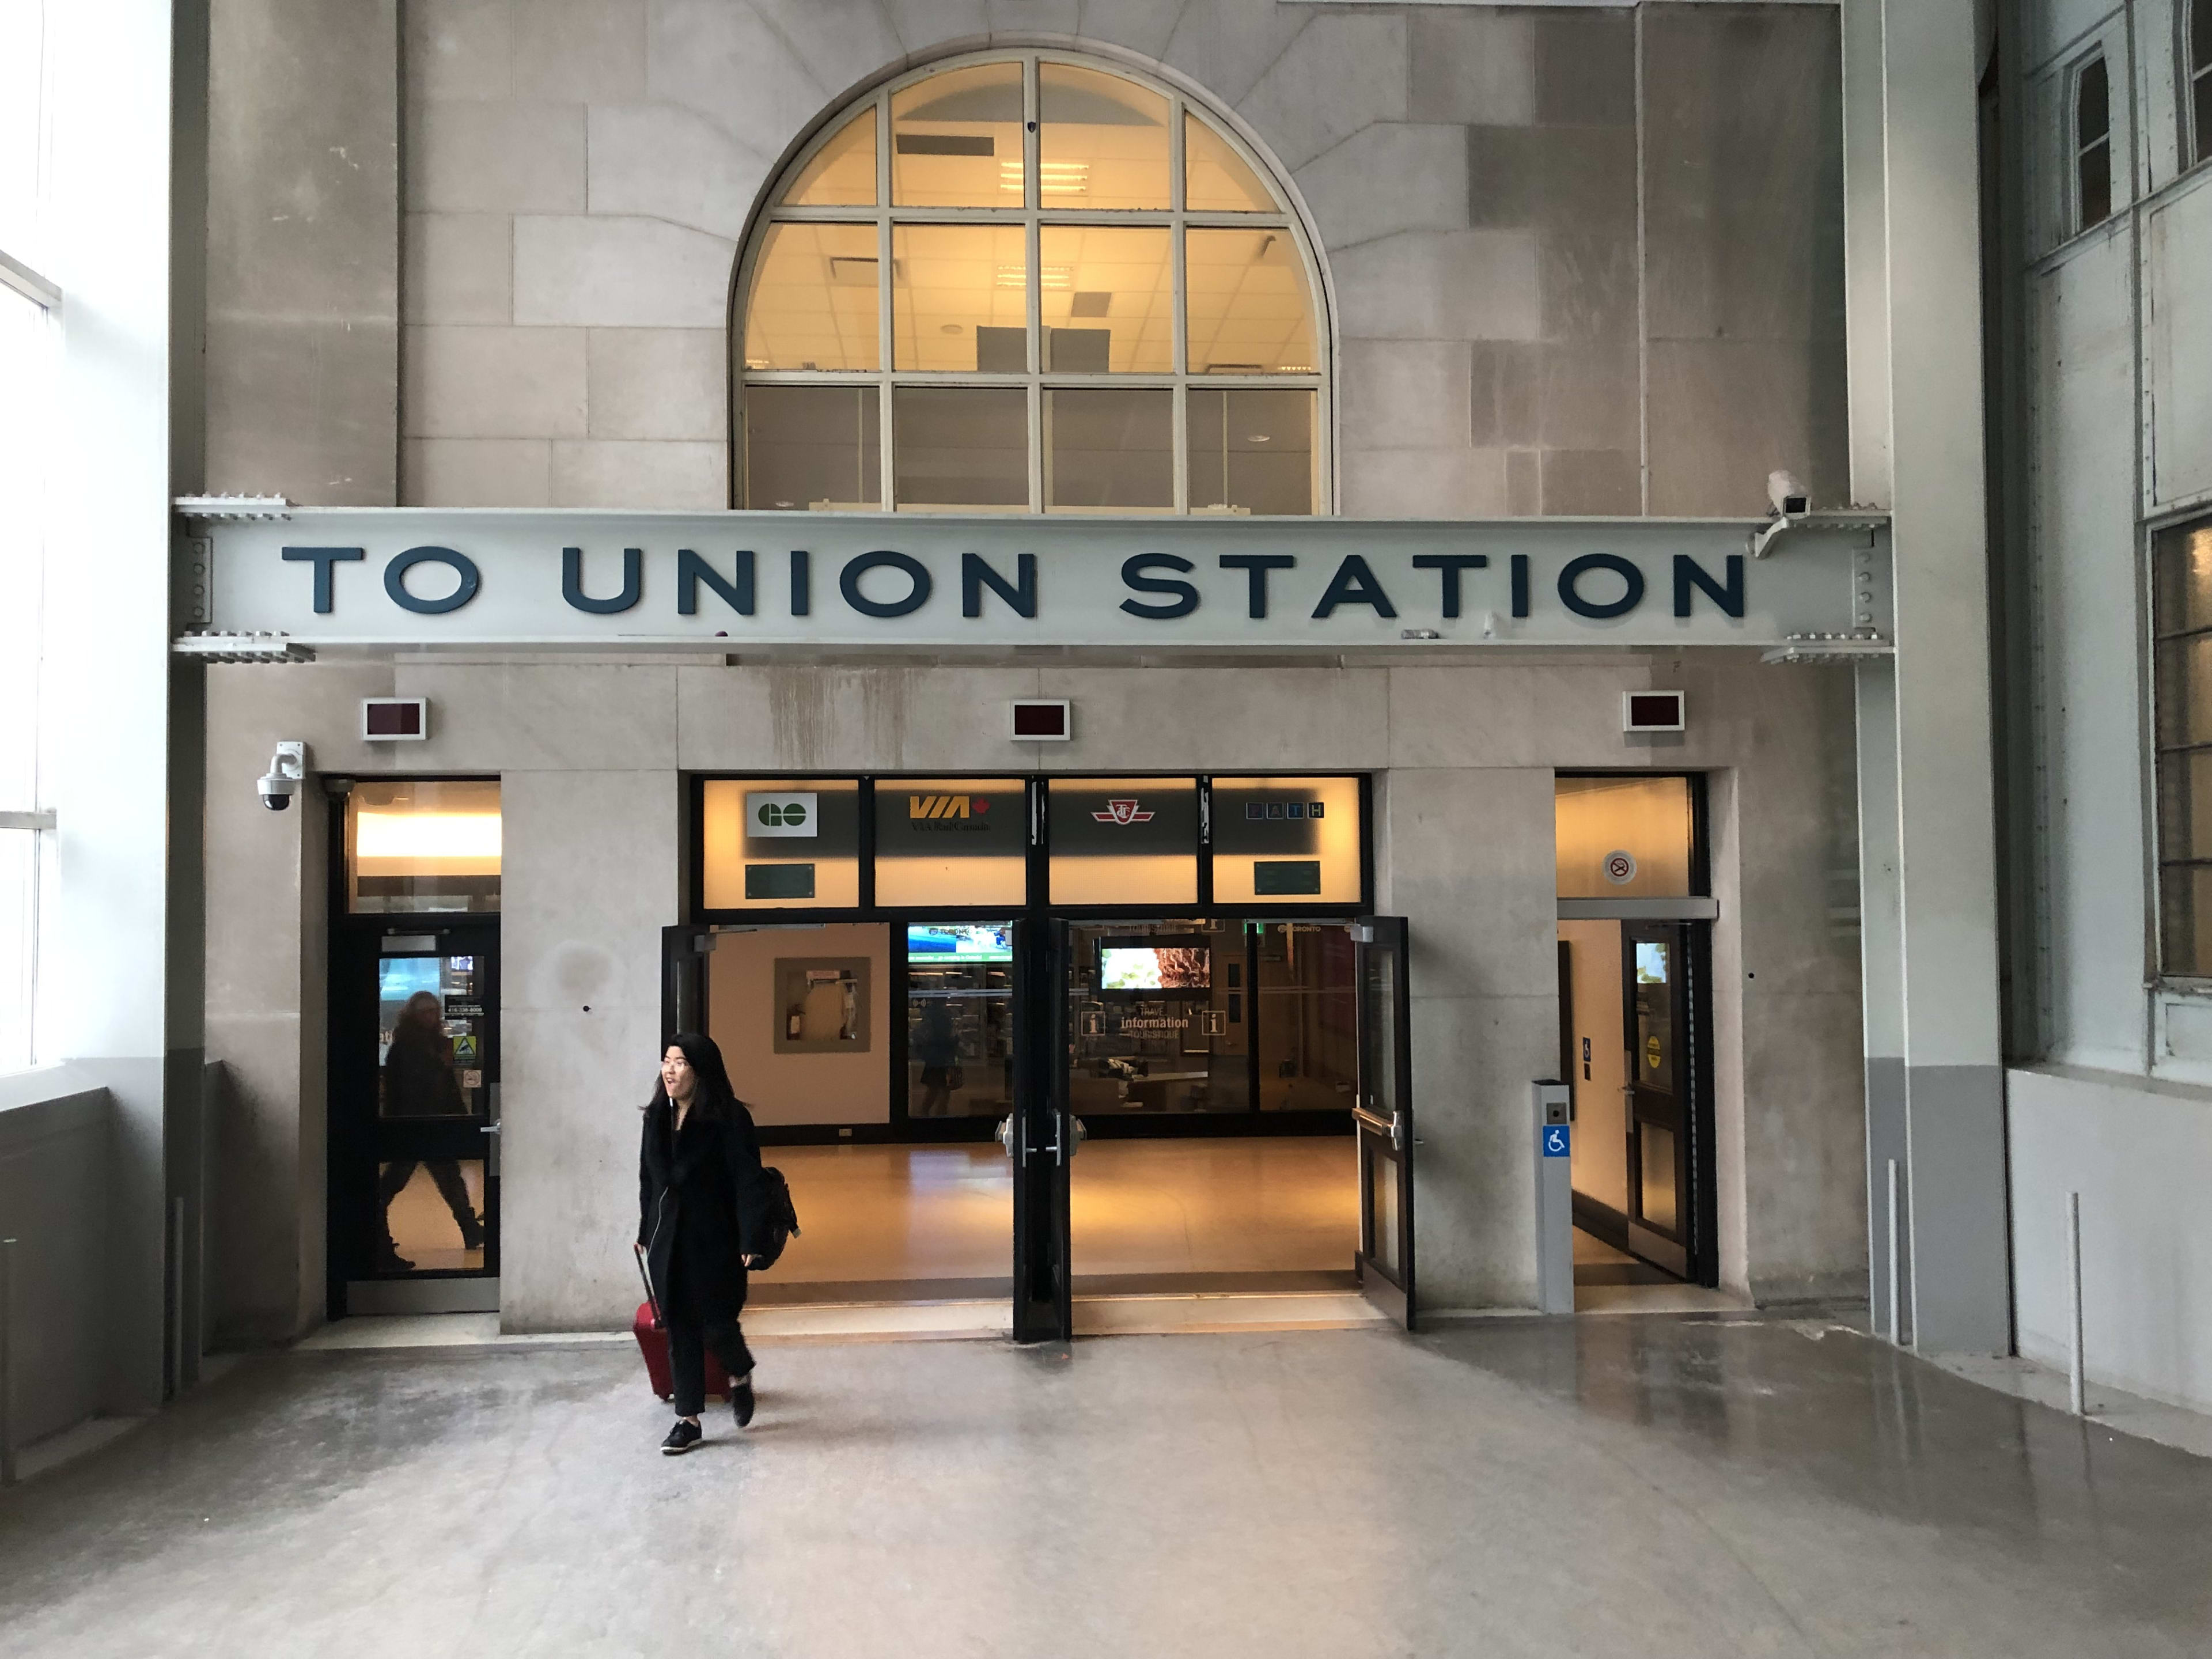 the Union Station sign.